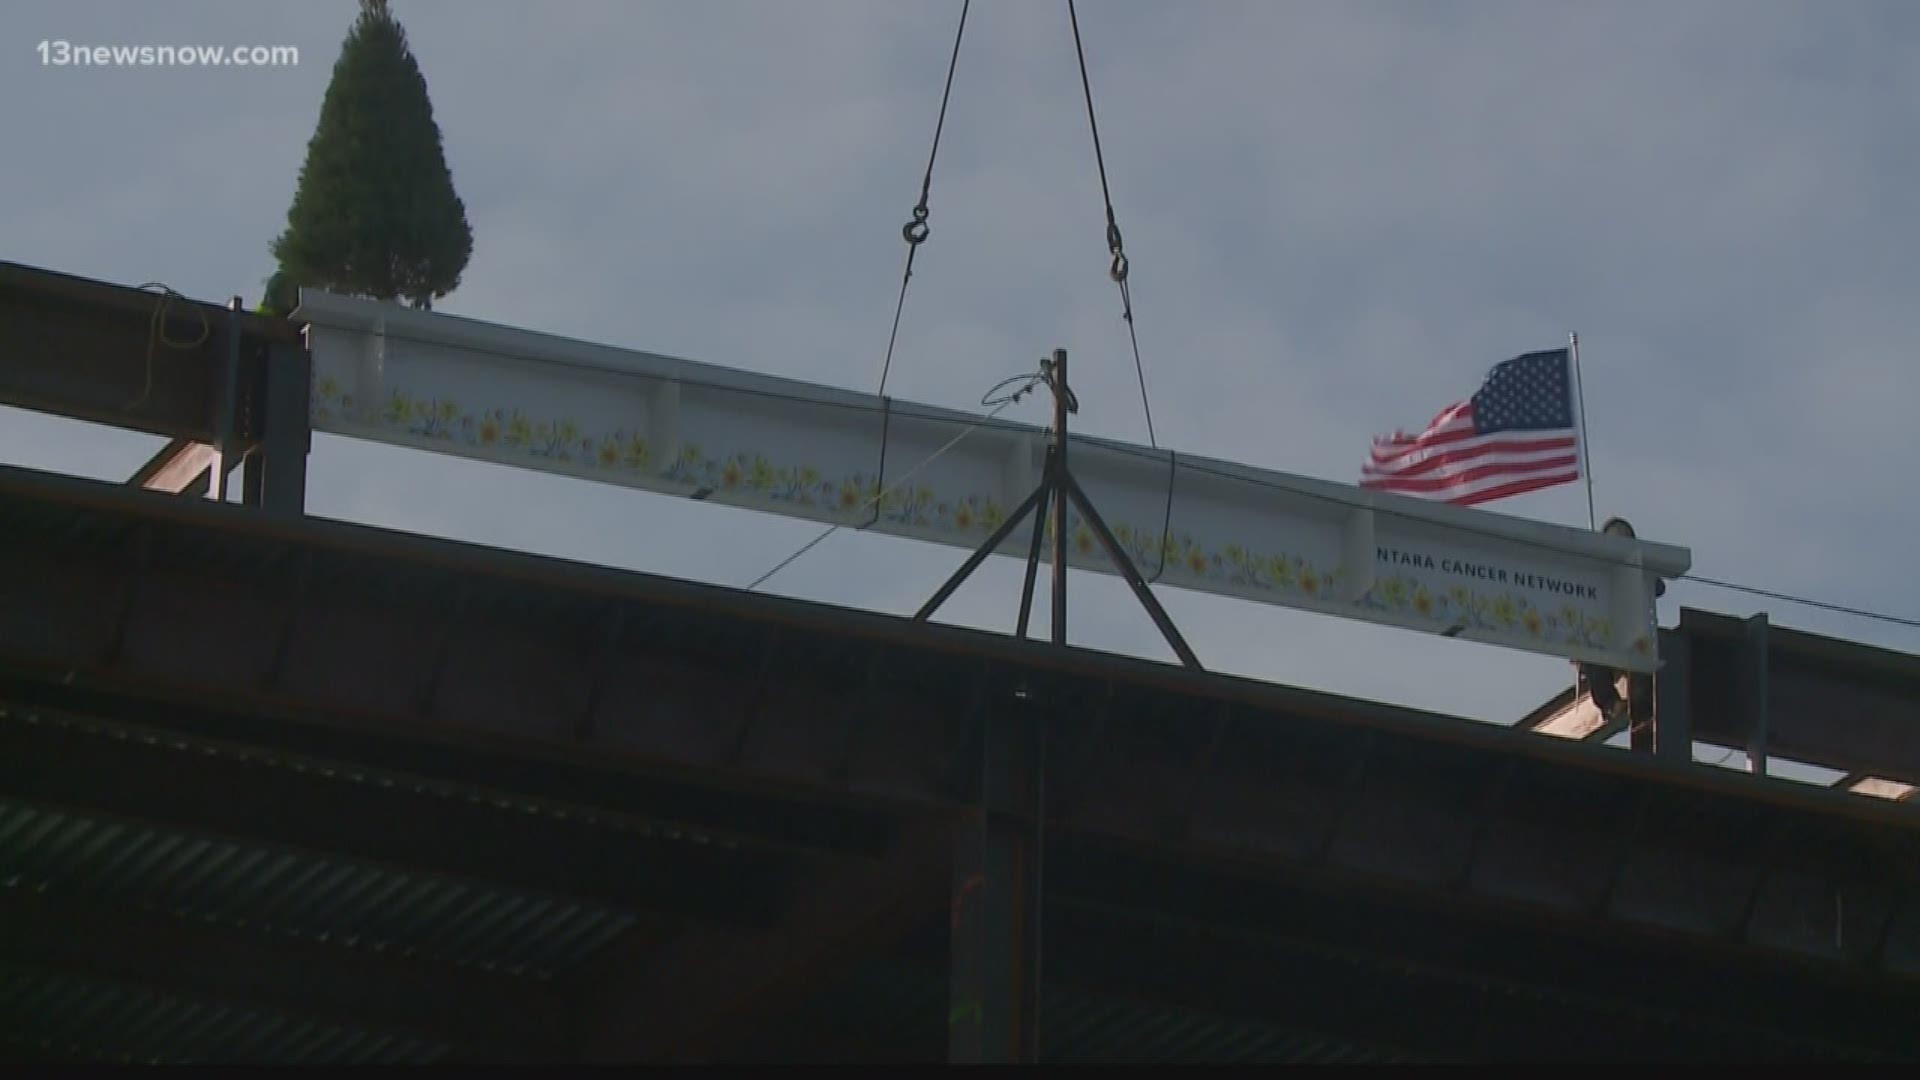 According to the American Cancer Society, eleven years from now, 36% more people are expected to have cancer. Sentara Leigh Hospital is building a cancer center in Norfolk and put the last beam in the structure Tuesday. The beam was decorated with meaning